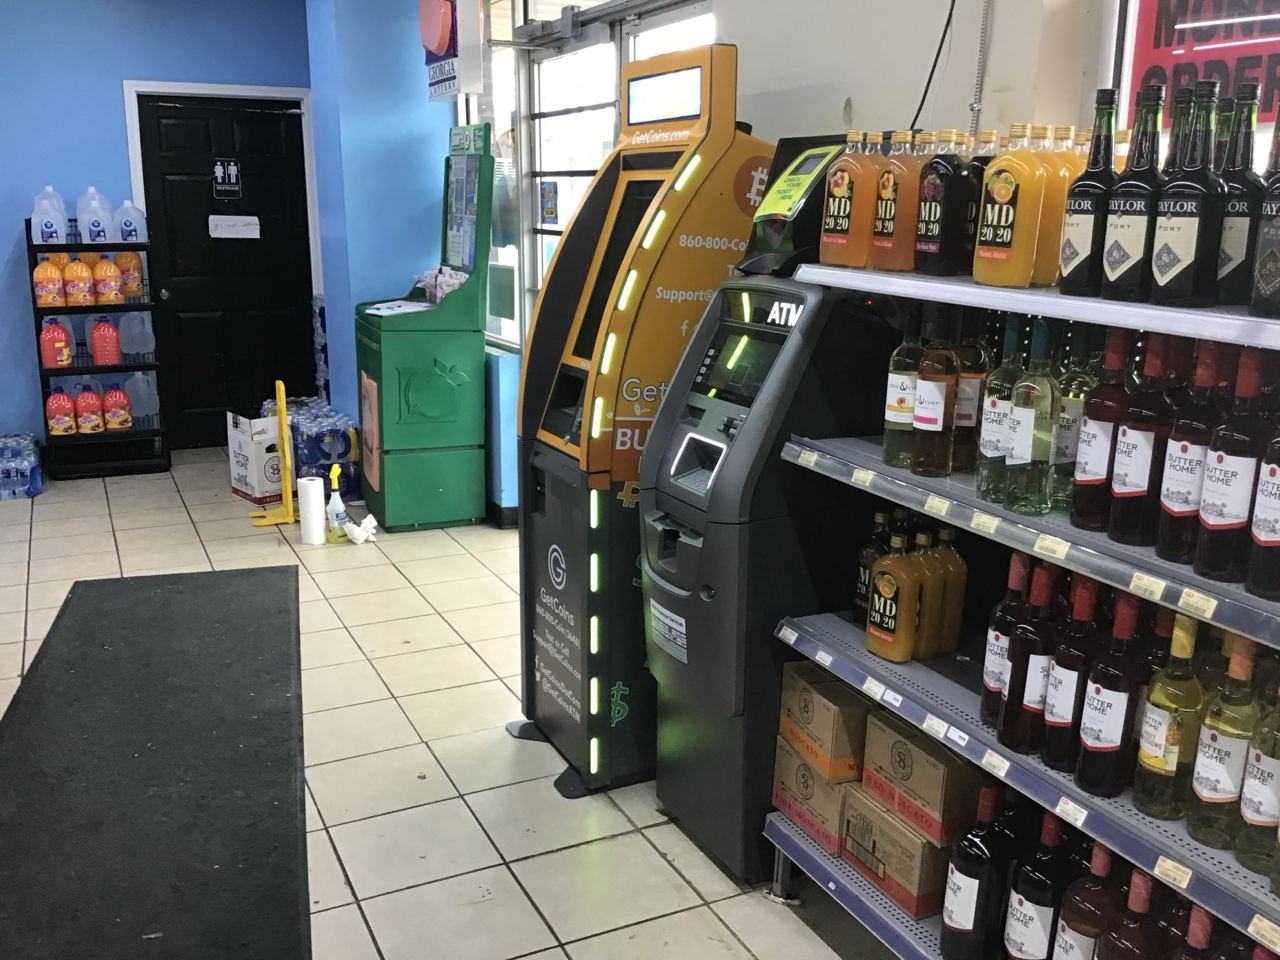 Getcoins - Bitcoin ATM - Inside of Chevron in Forest Park, Georgia